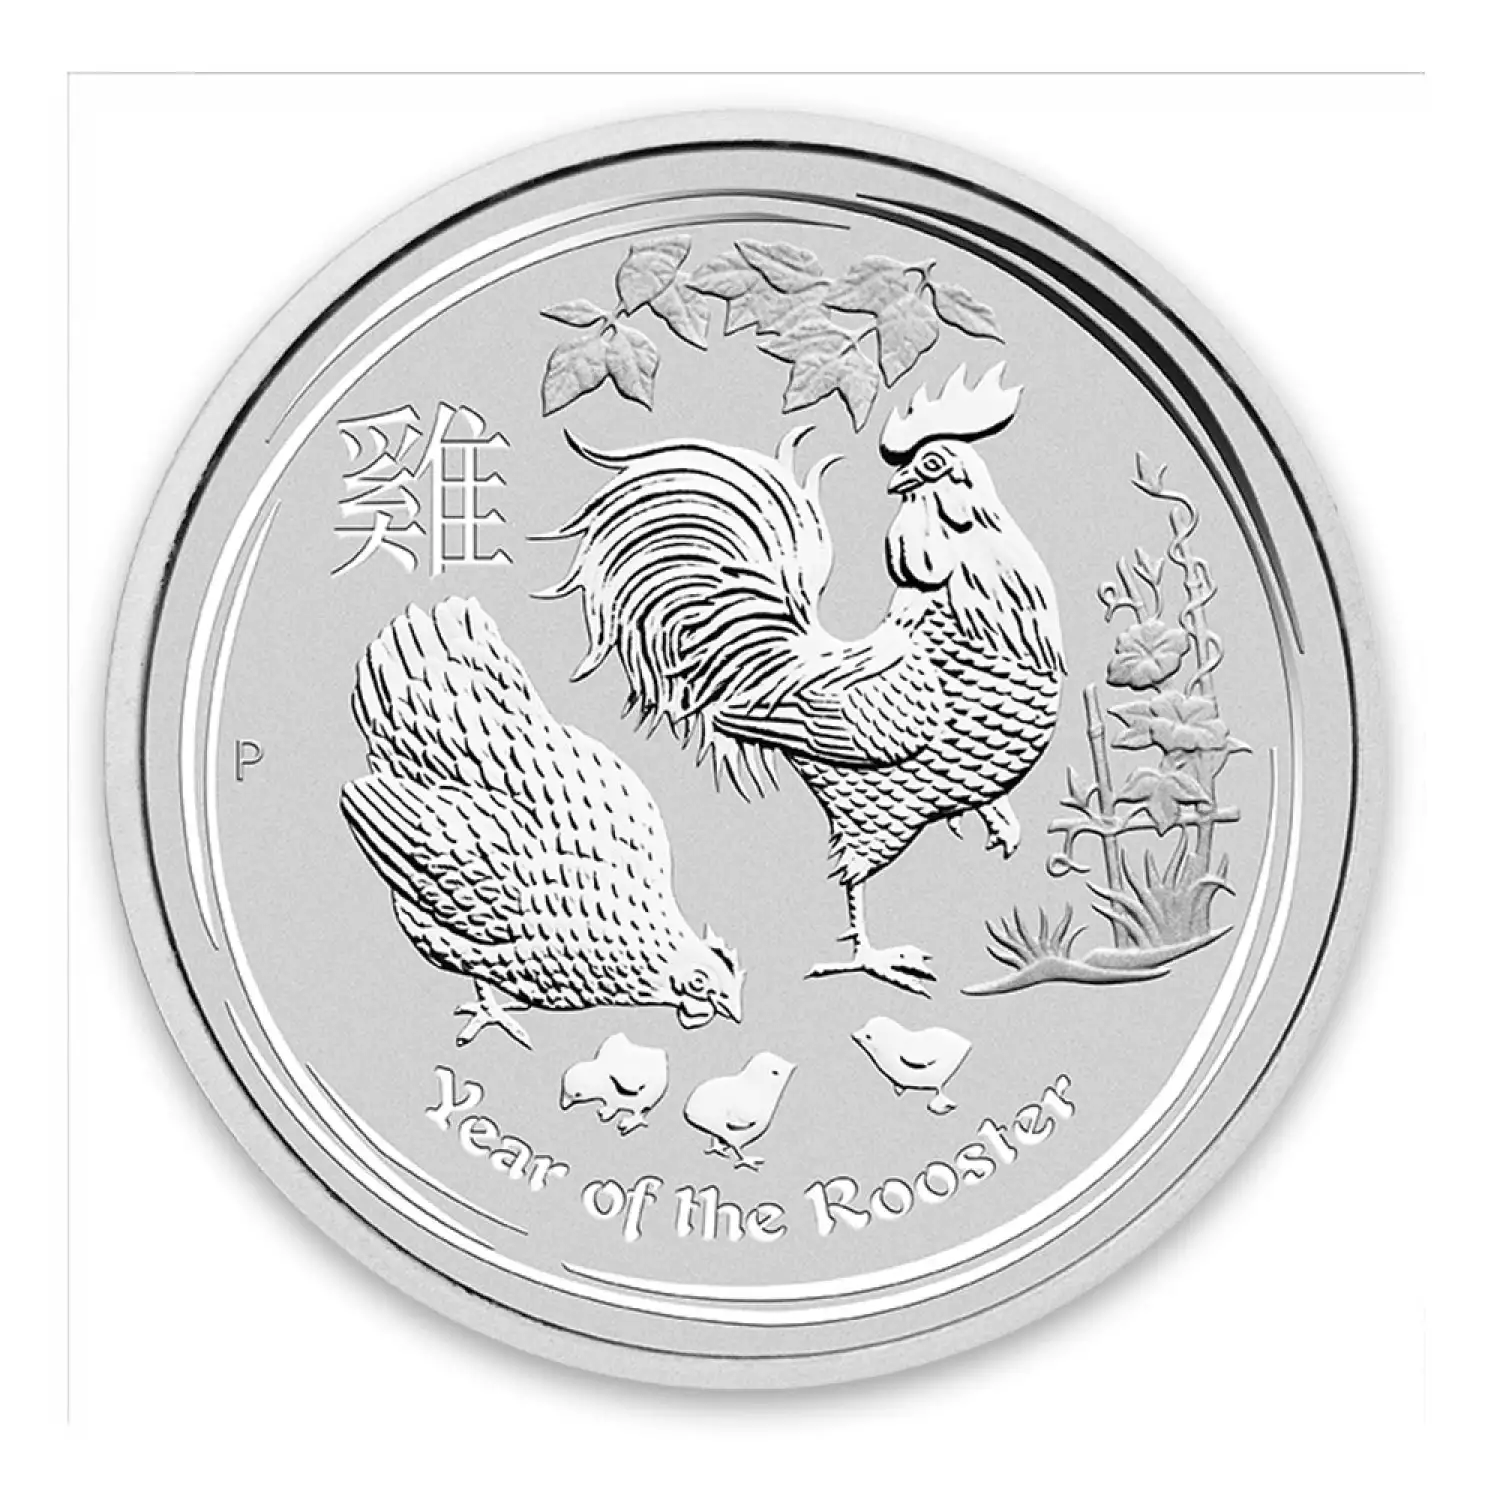 2017 1 oz Australian Perth Mint Silver Lunar II: Year of the Rooster (3)